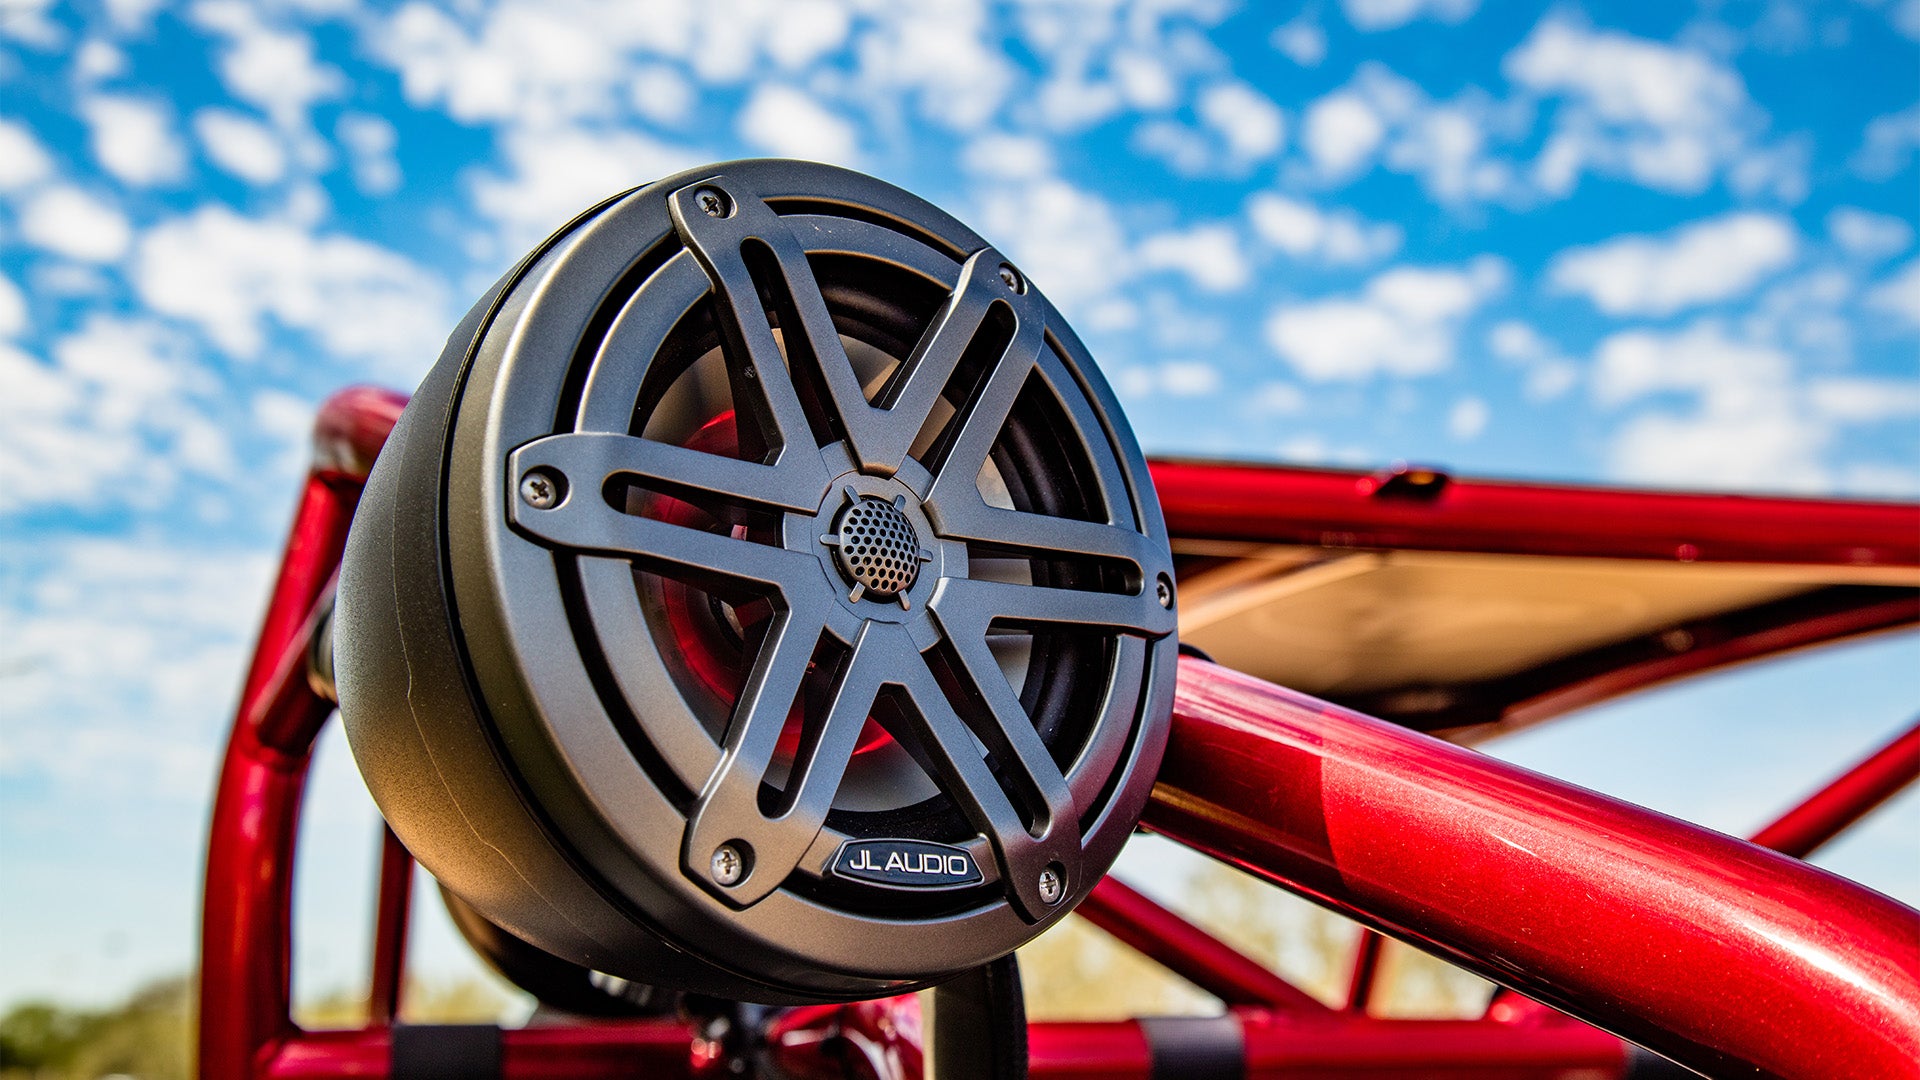 A gunmetal VeX unit on a red framed powersports vehicle with a bright blue sky background.